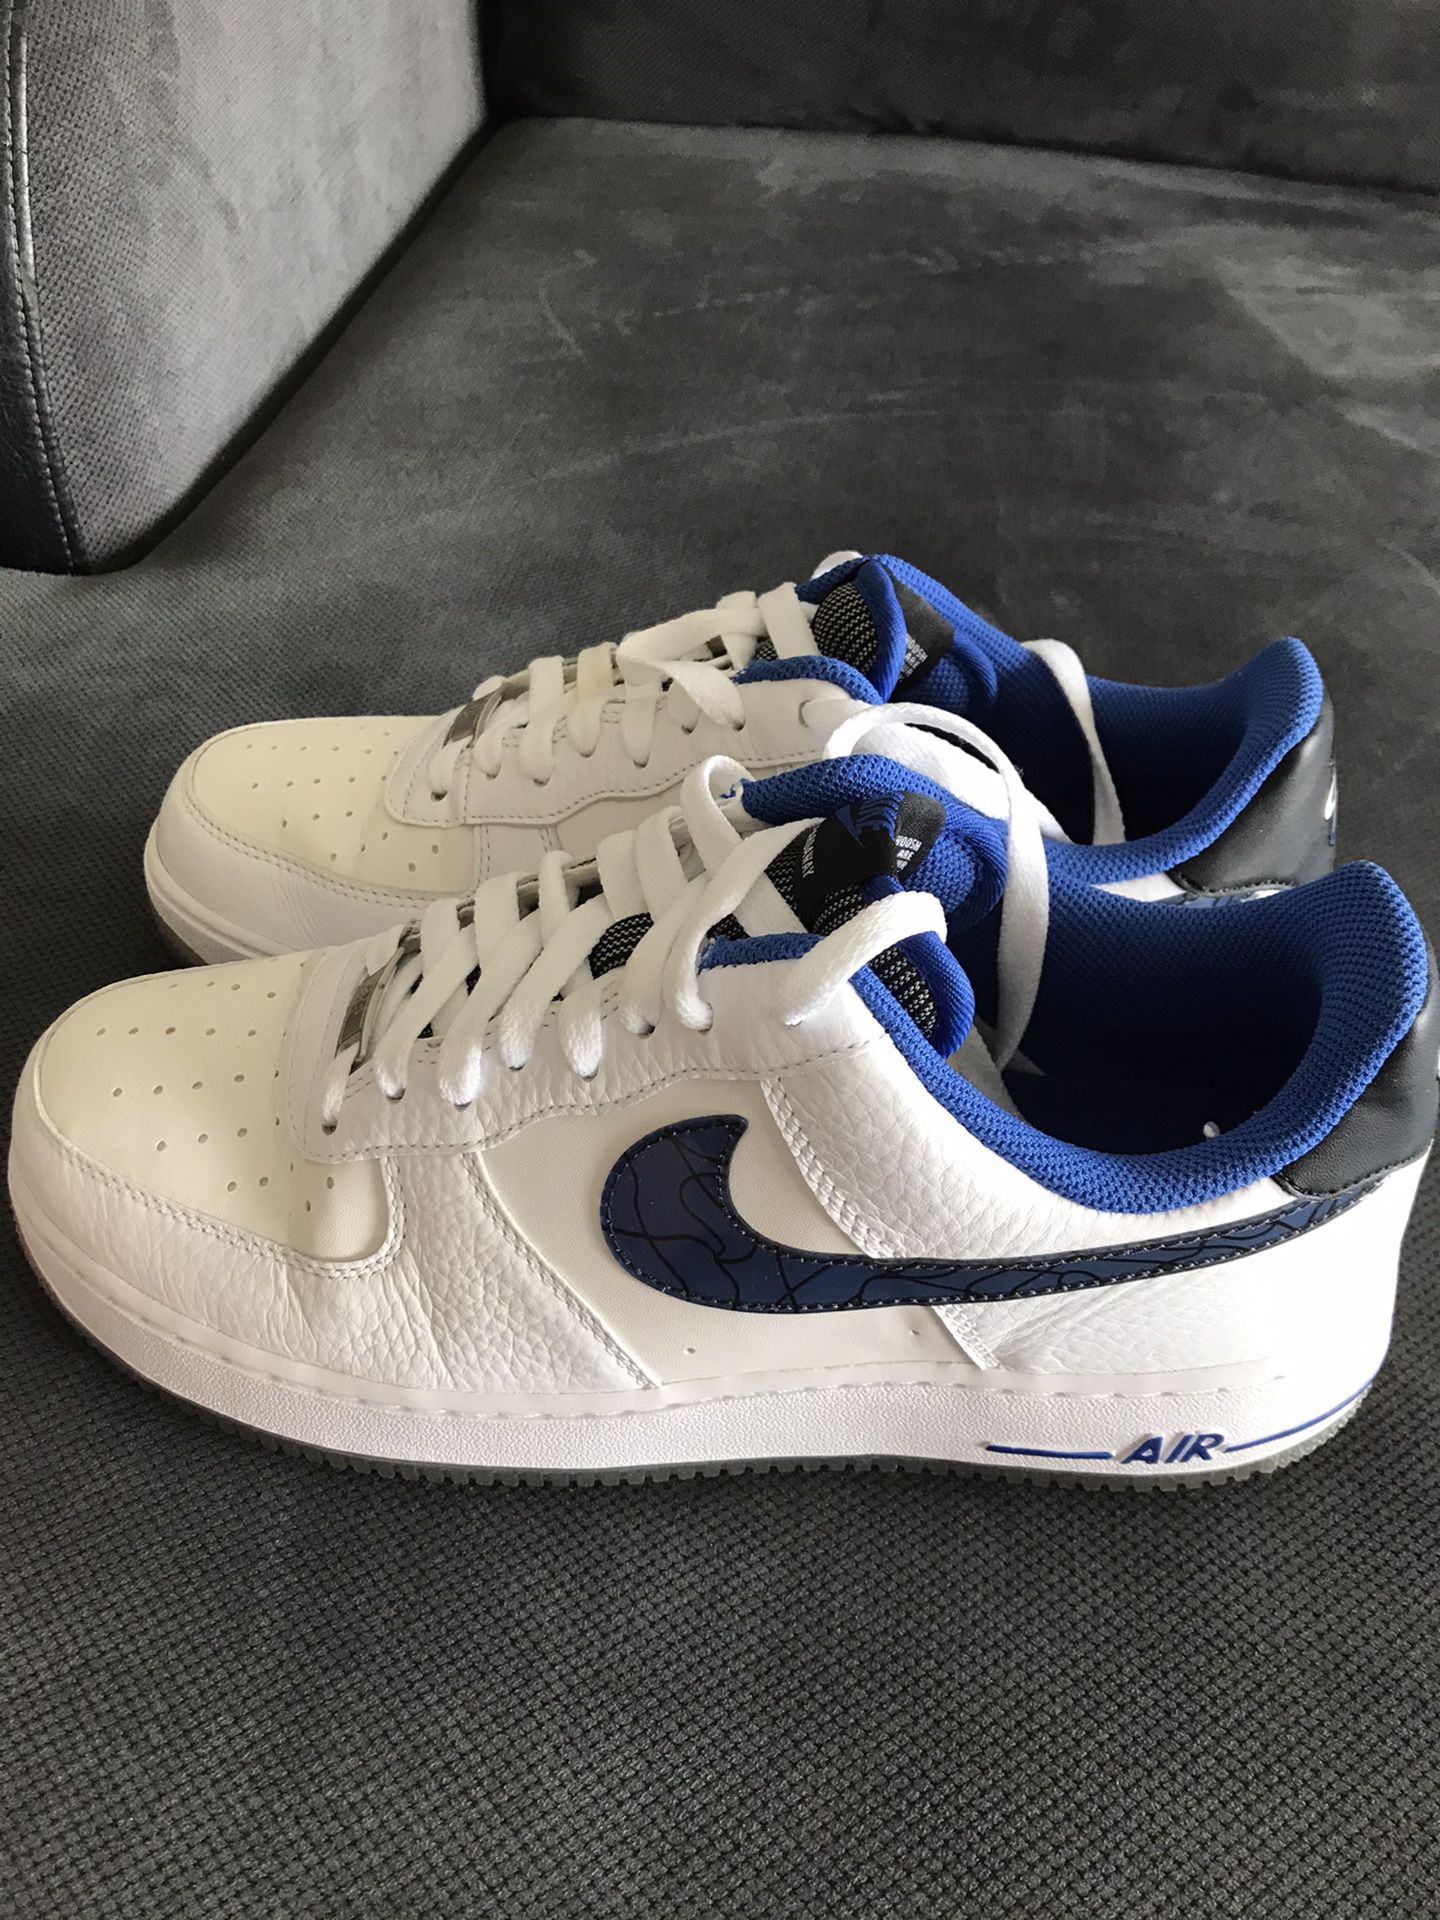 Force Low 07 Penny Hardaway for Sale in North Miami Beach, FL - OfferUp